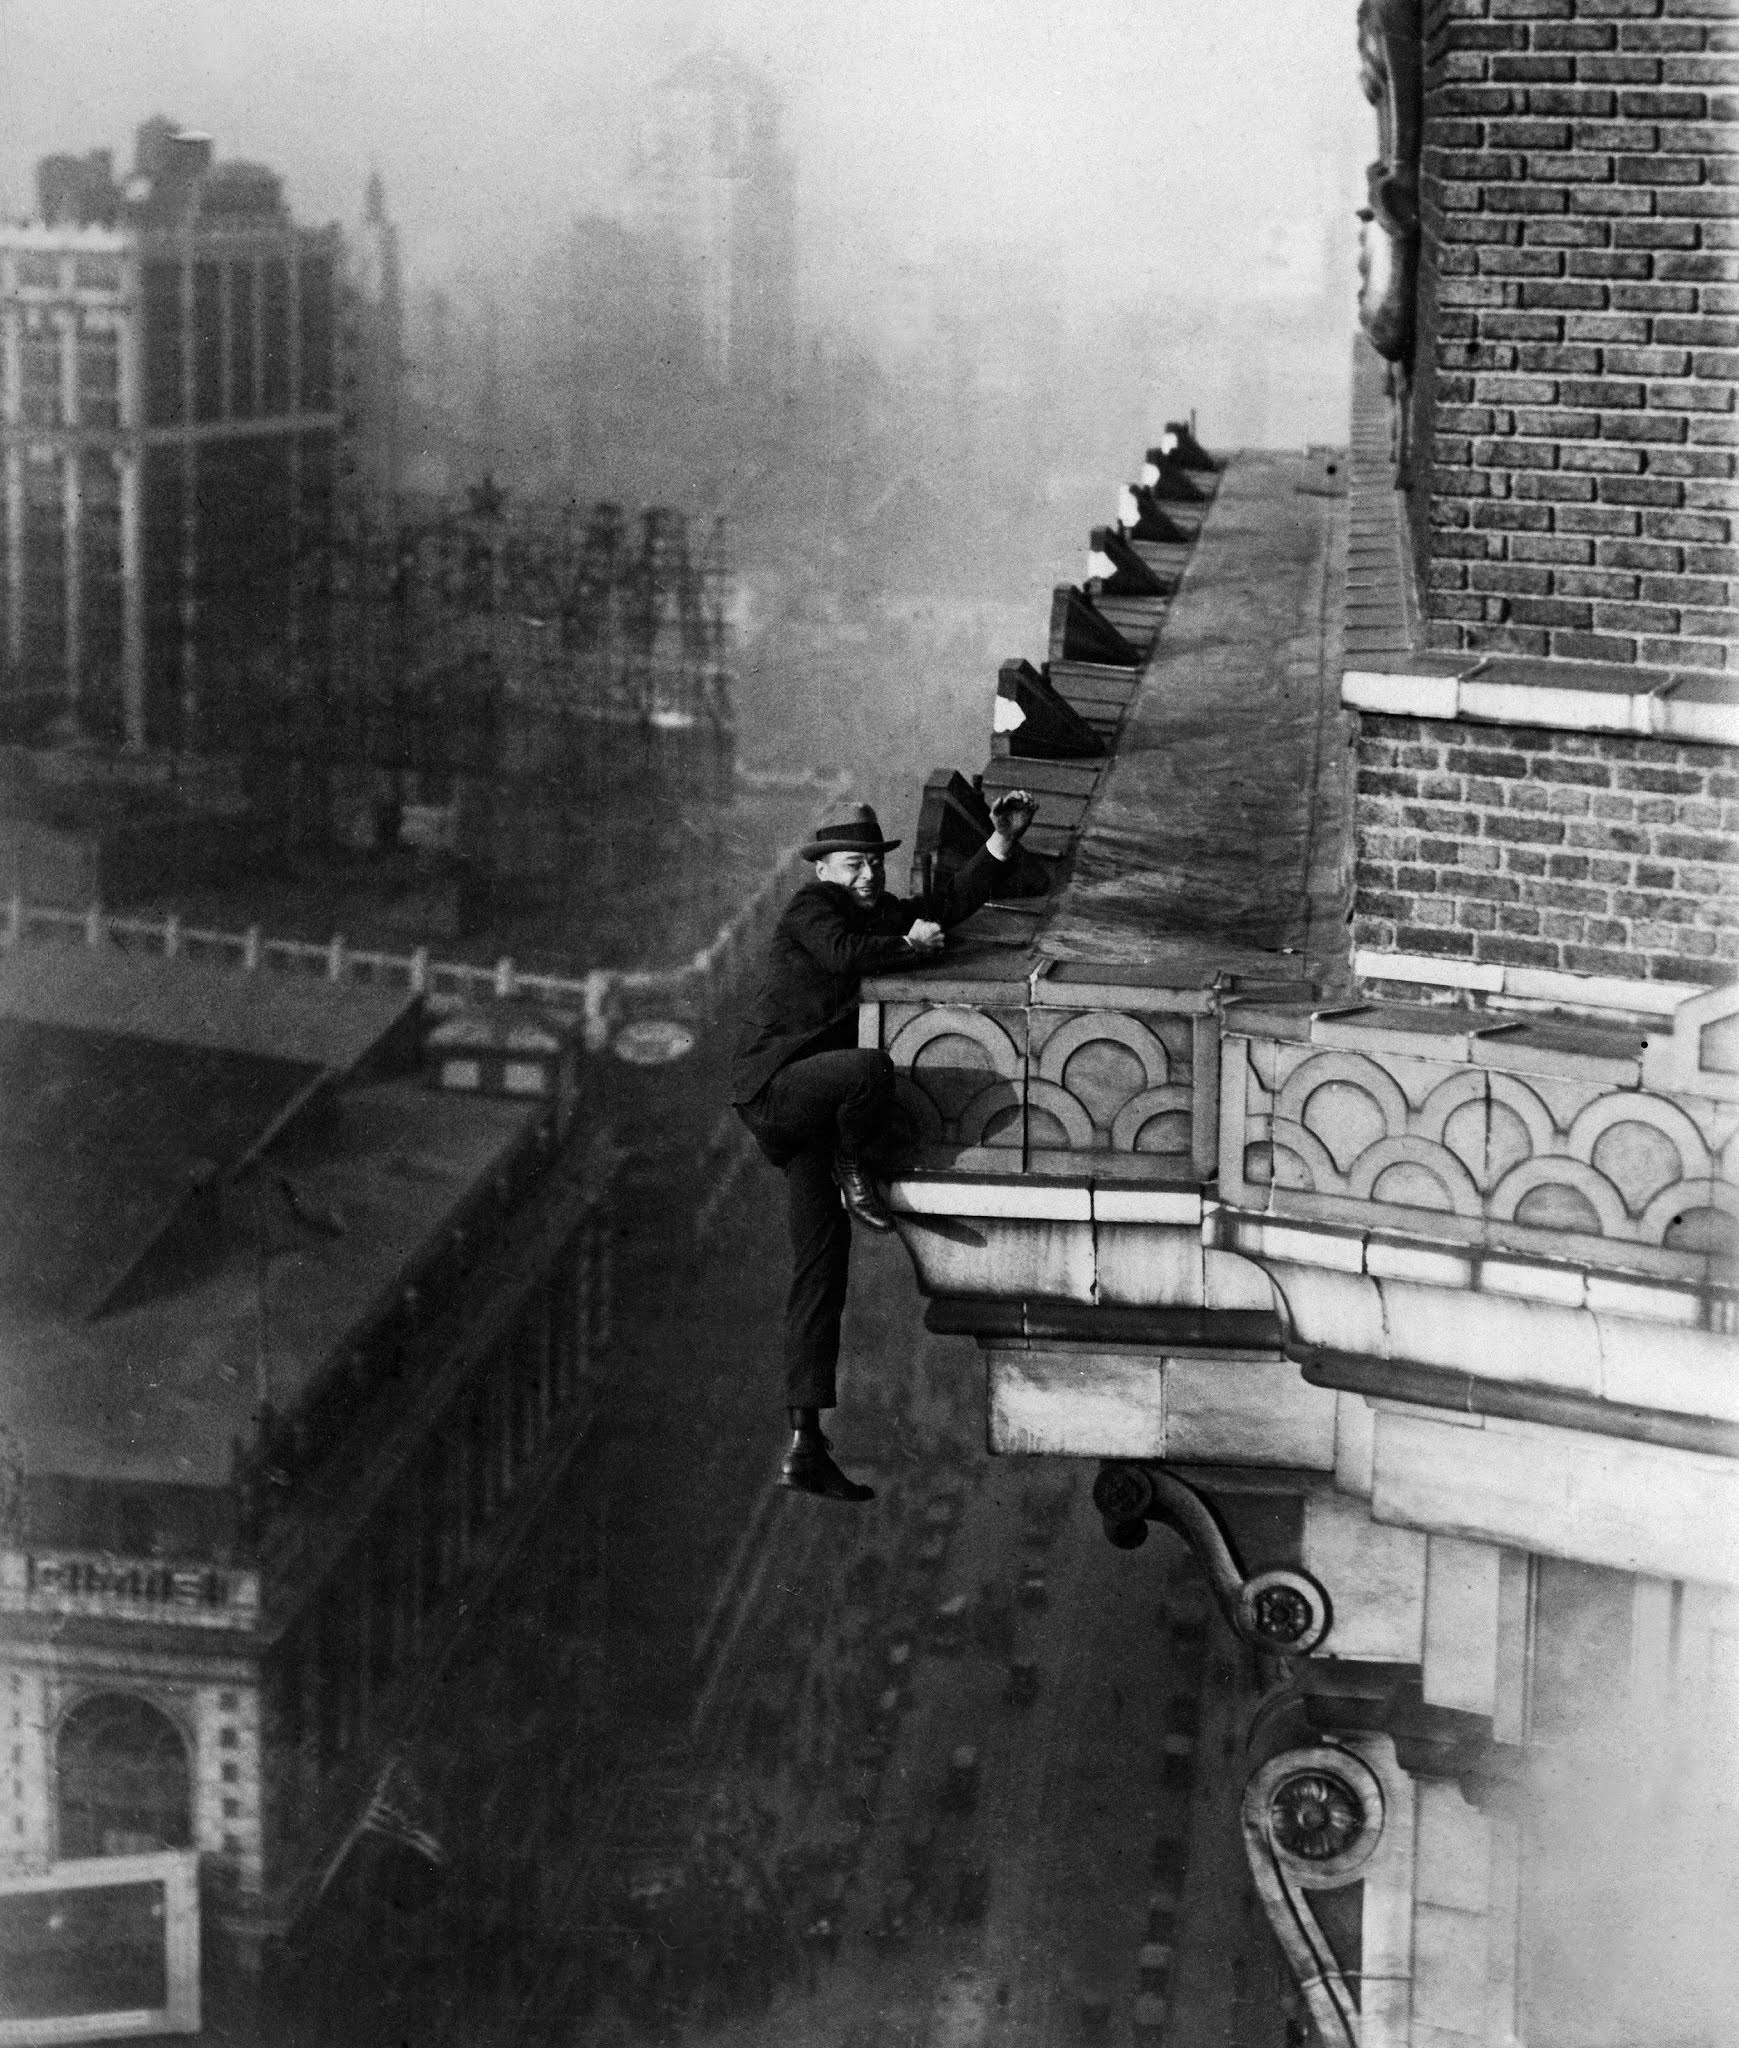 Harry Gardiner hanging from the 24th story of the Hotel McAlpin in New York City, 1910.